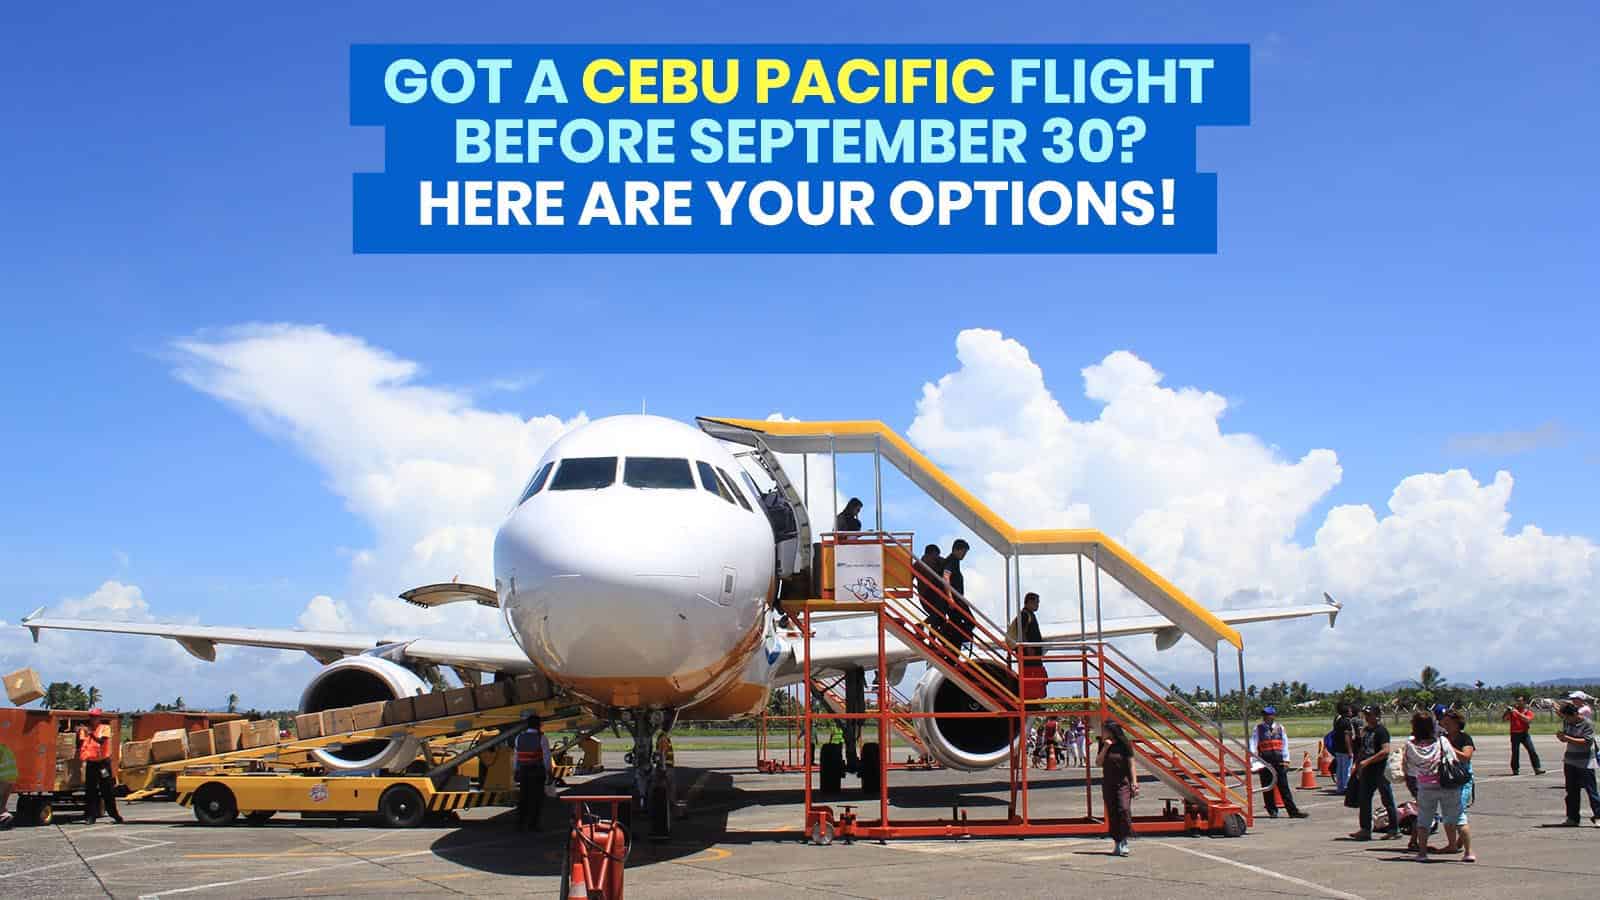 CEBU PACIFIC Flights from June 1-September 30: How to REBOOK or Use Travel Fund